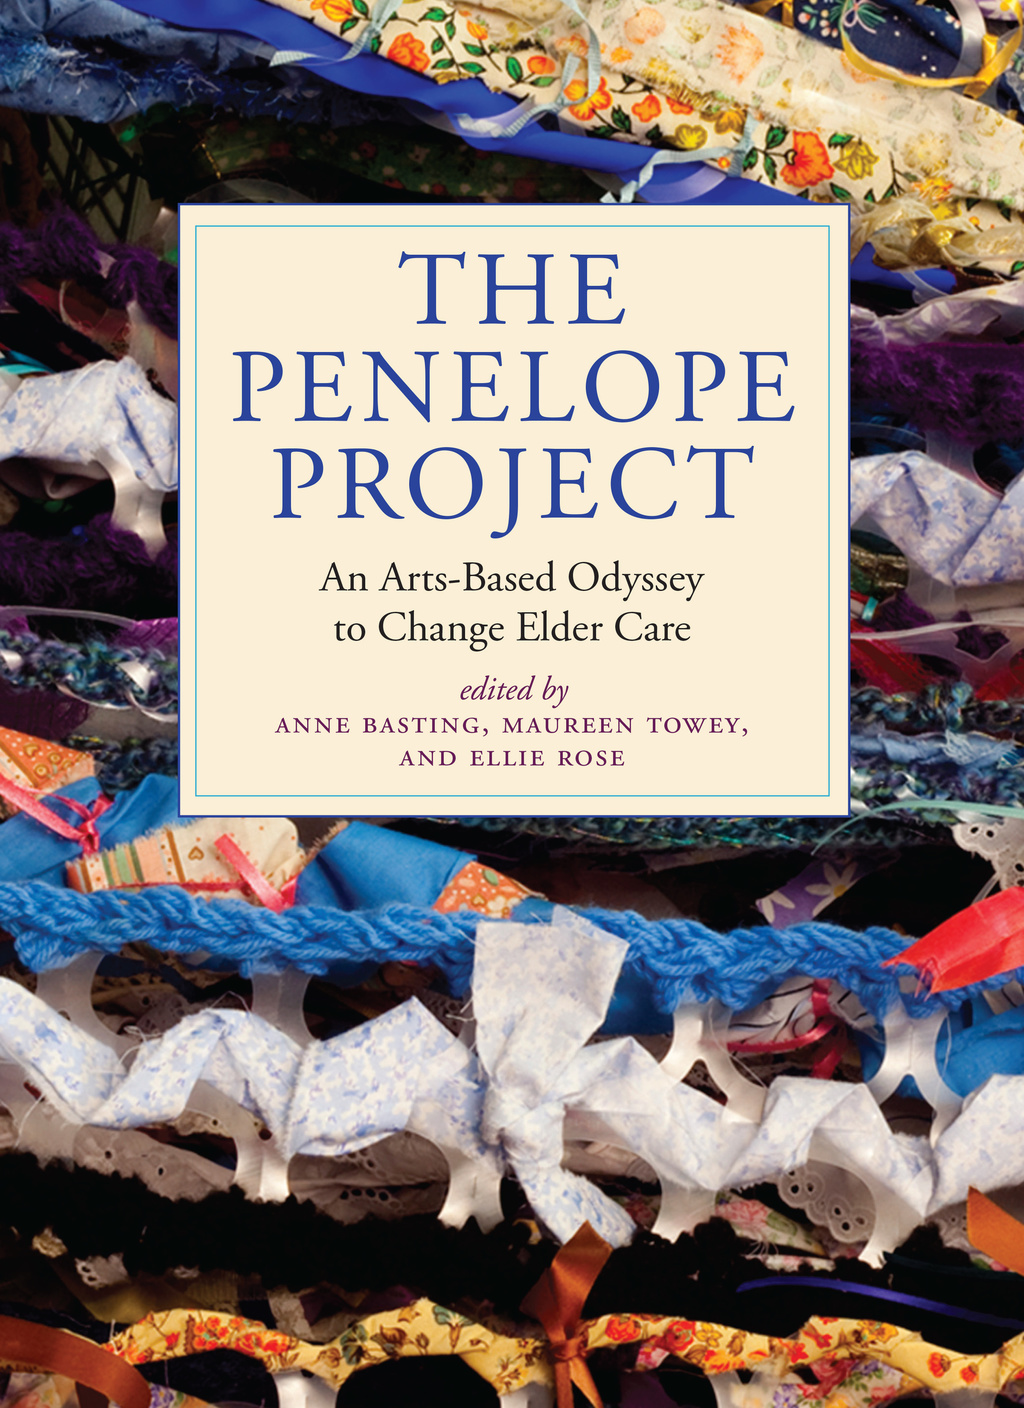 Cover of The Penelope Project book